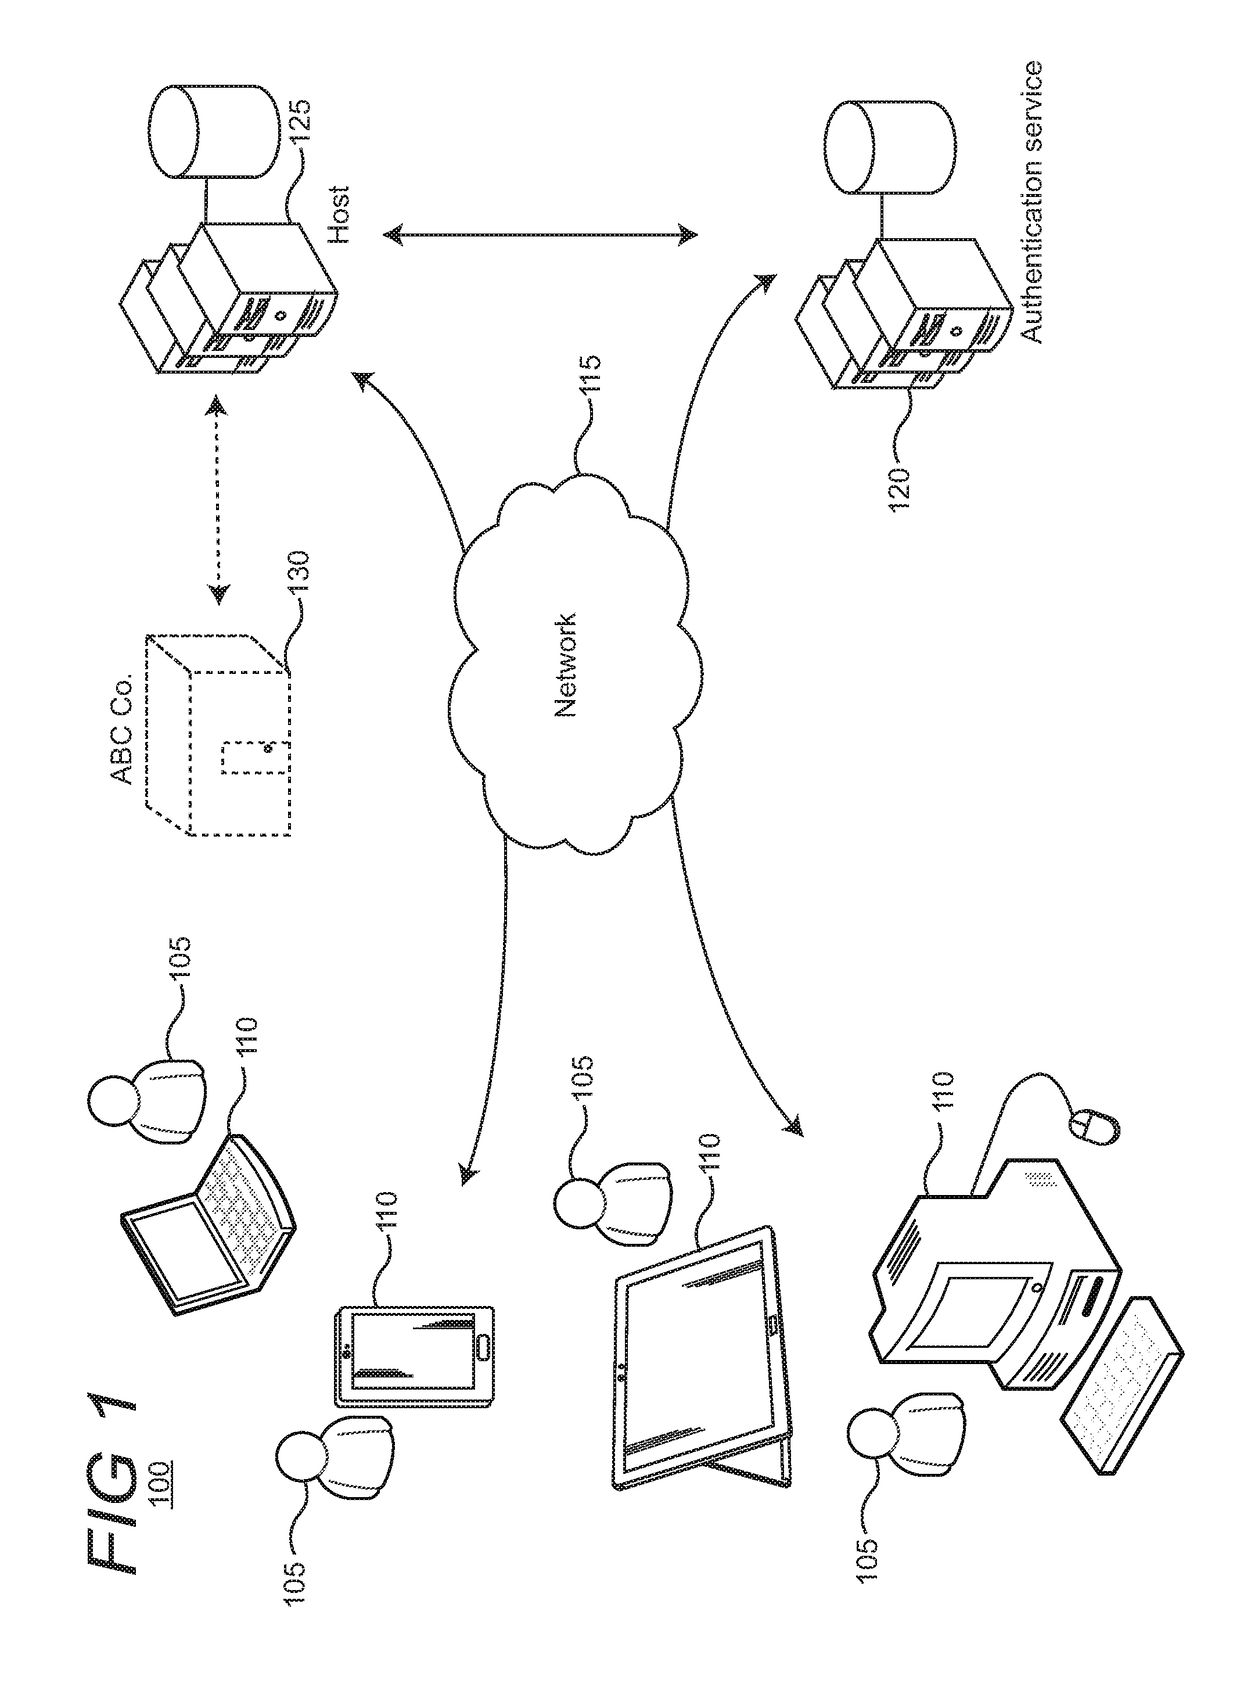 User and device authentication for web applications